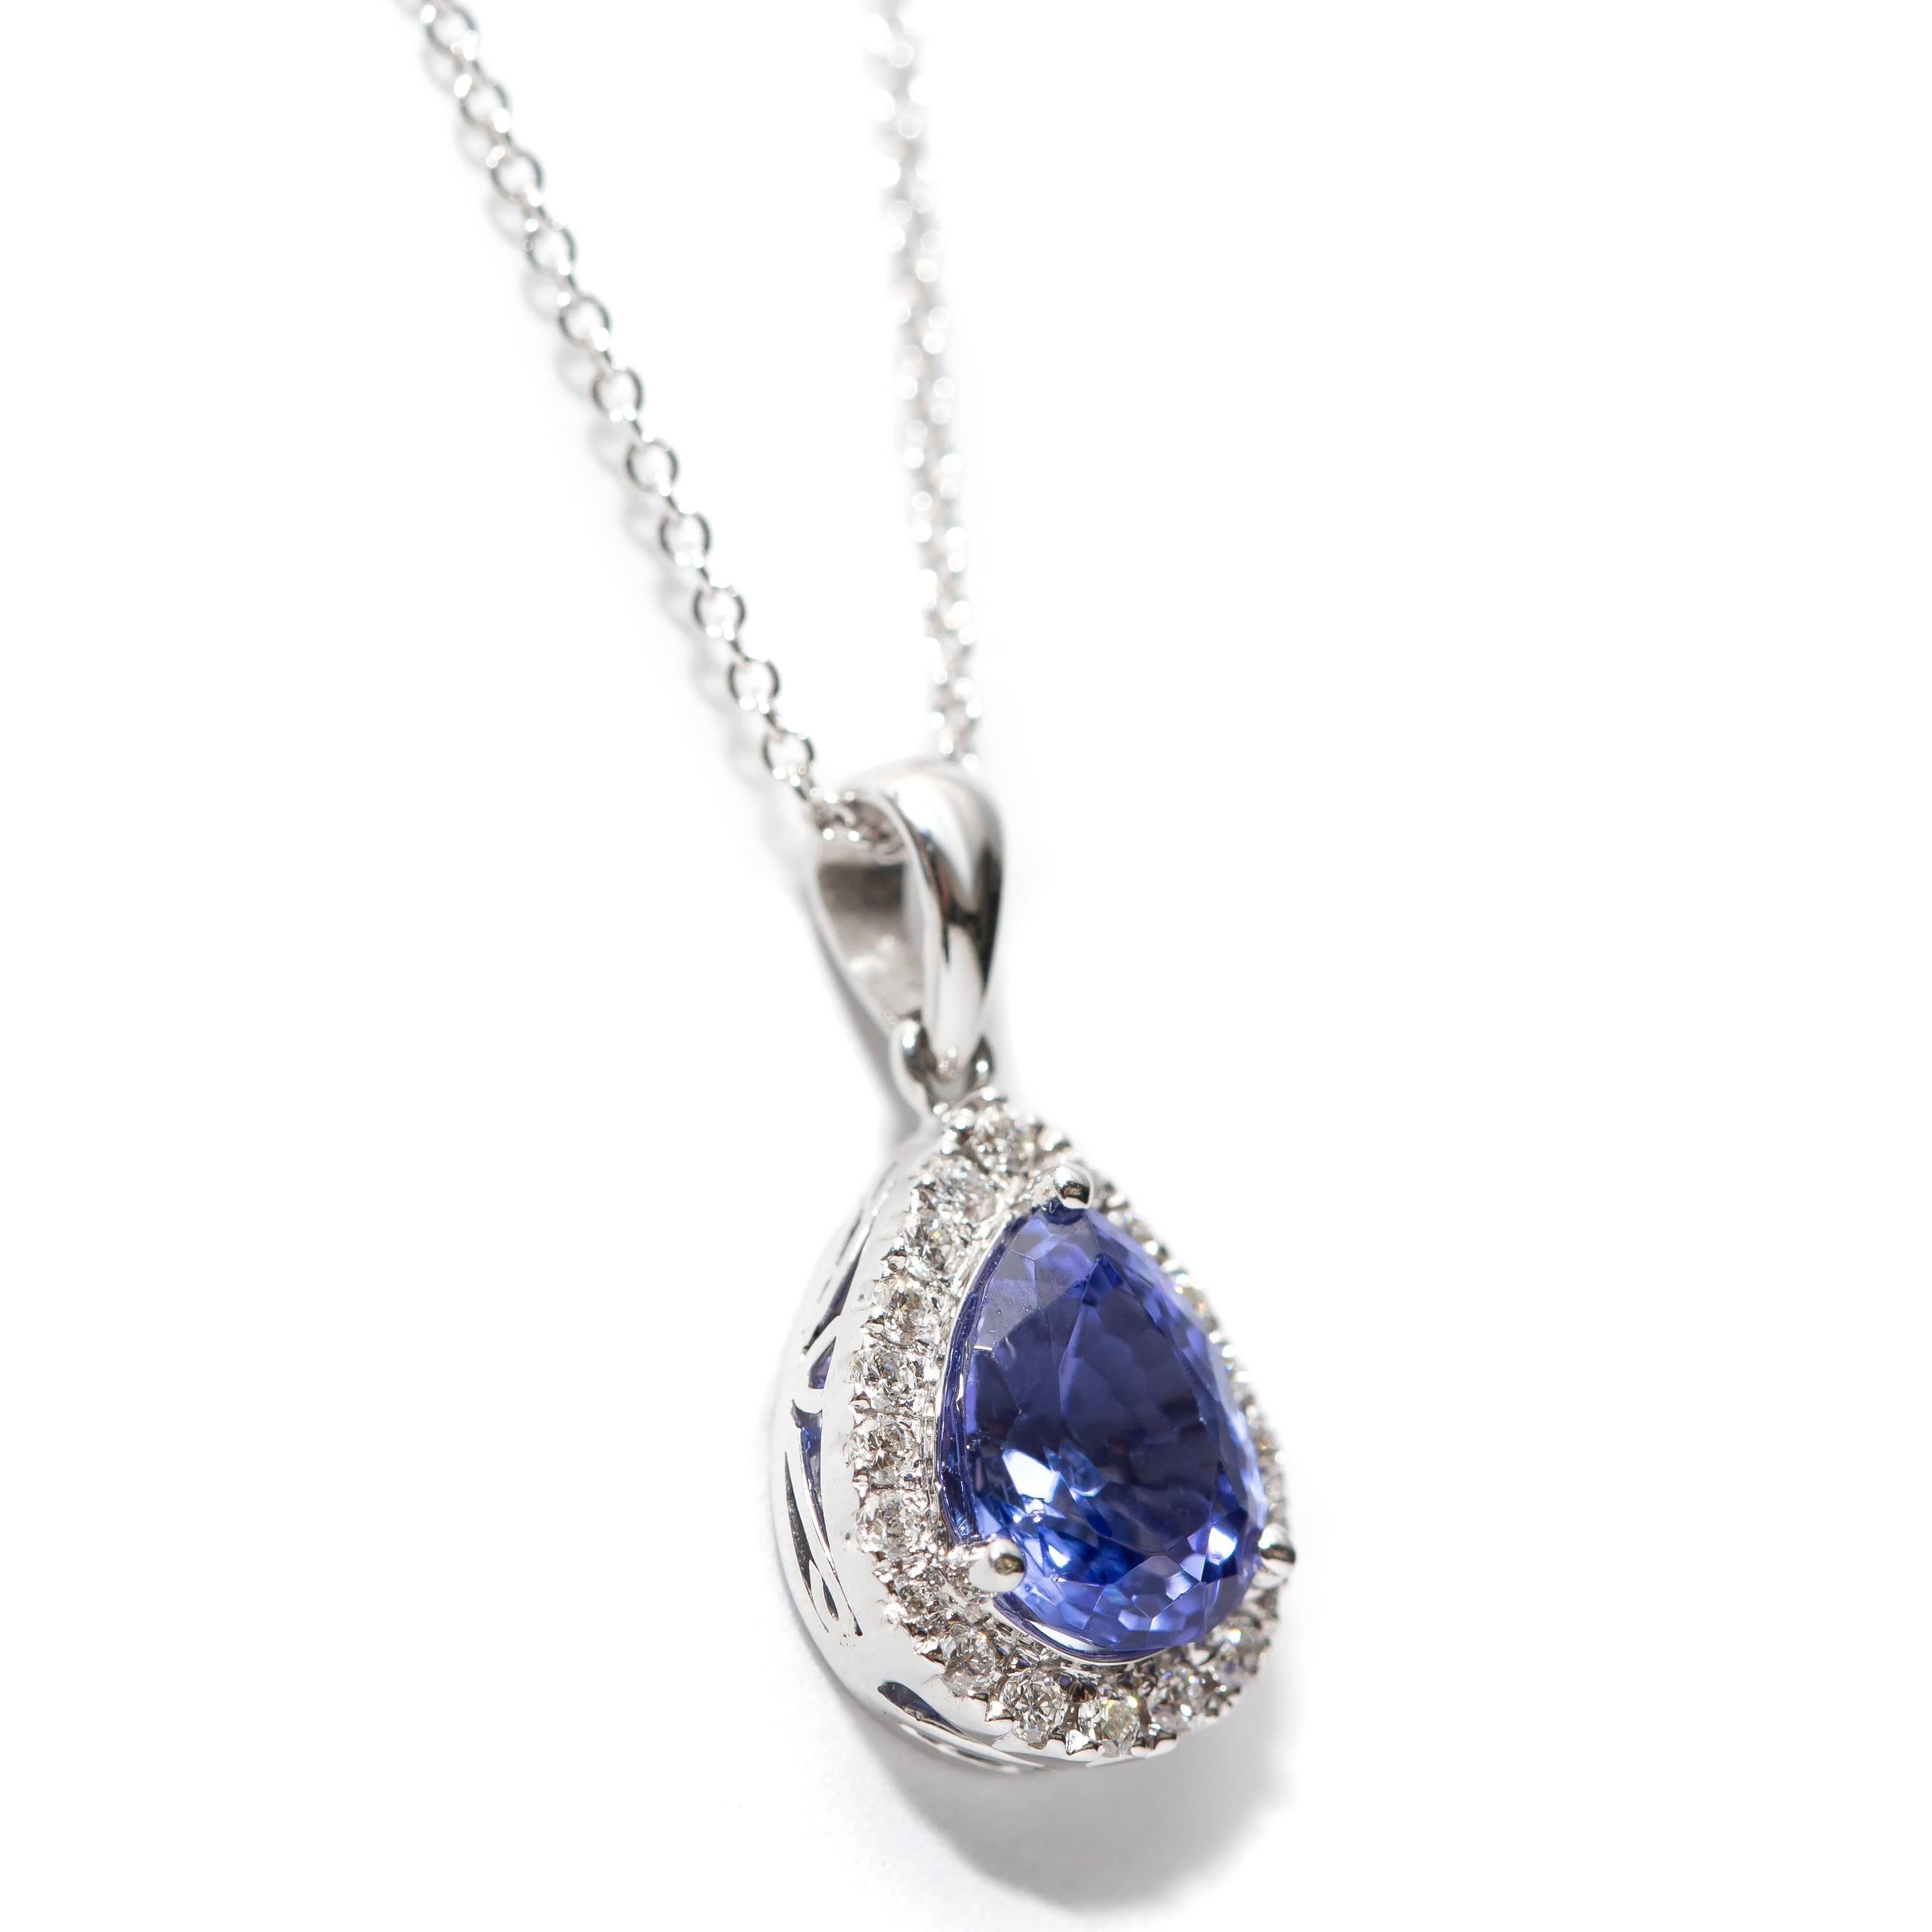 A Gorgeous 1.25 Carat Pear Shaped Tanzanite Halo Pendant Necklace featuring 0.30 Carat of White Round Brilliant Diamonds Set in 18 Karat White Gold. Other chain sizes are available upon request. British Hallmarked. 

This pendant can be made bespoke